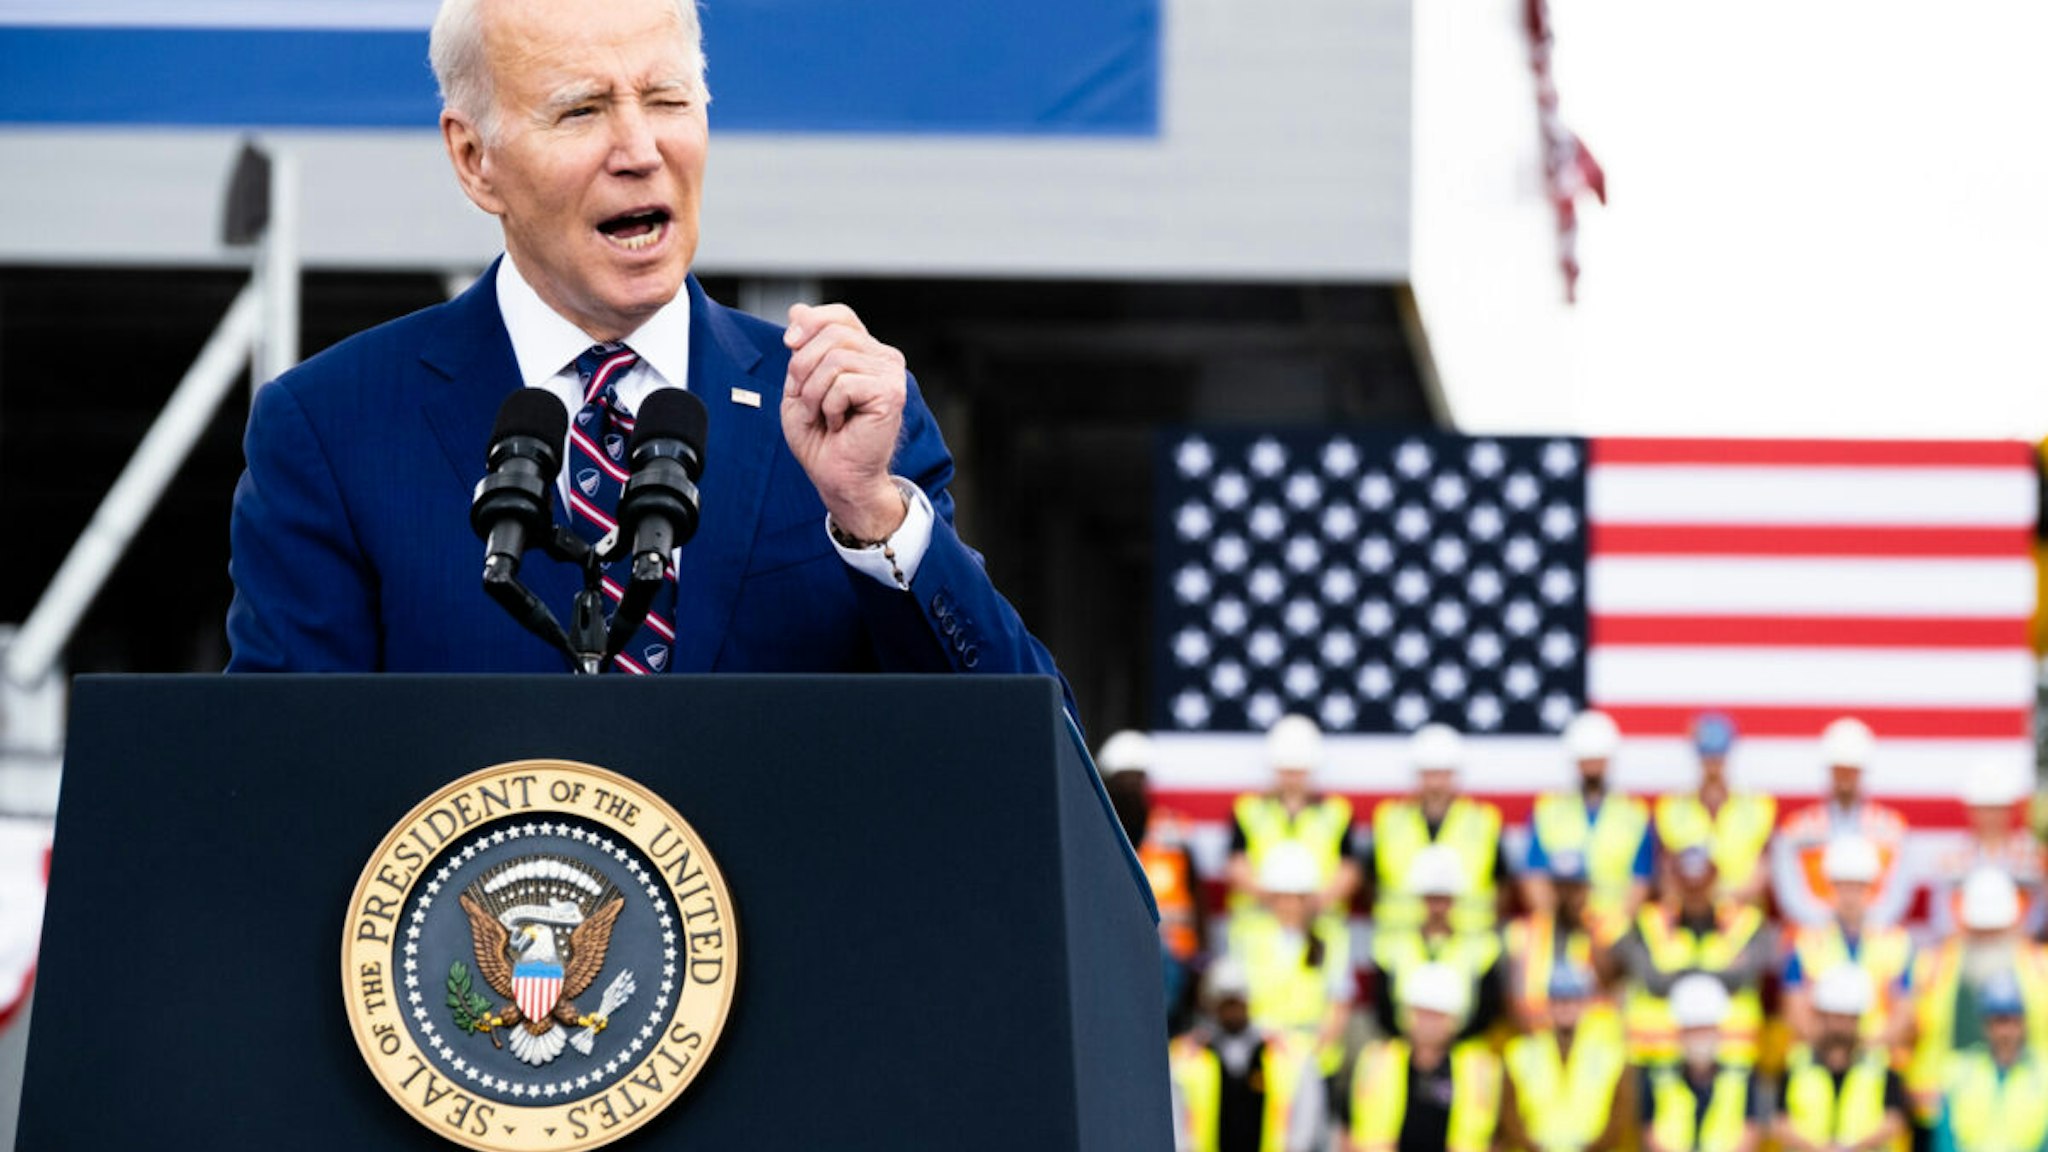 US President Joe Biden speaks at Wolfspeed Inc. in Durham, North Carolina, US, on Tuesday, March 28, 2023. Wolfspeed, a manufacturer of semiconductors and chip components, has announced a $5 billion investment that will create 1,800 new jobs, according to a White House official.